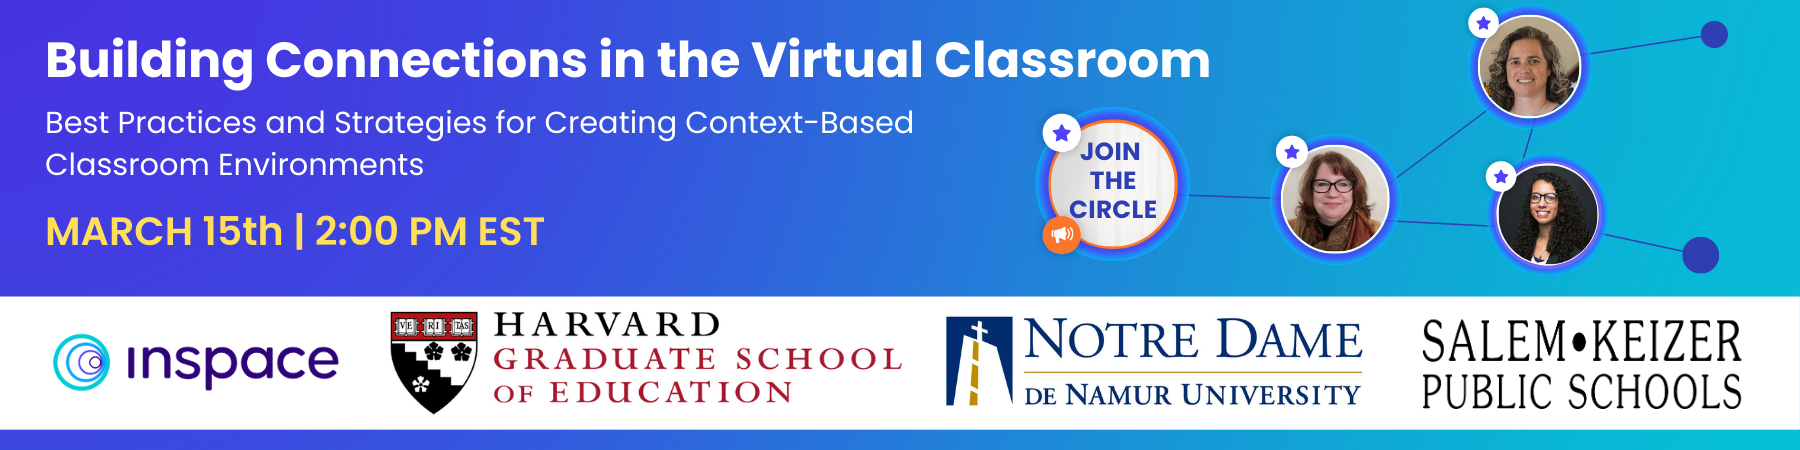 Building Connections in the Virtual Classroom: Best Practices and Strategies for Creating Context-Based Classroom Environments. This conversation will take place March 15th at 2 pm EST. It will be an inclusive conversation among experienced educators, showcased by a graphic connecting the headshots of all featured guests, along with a large InSpace host circle around a mirror, and the text reading 'join the circle', inviting the reader to join the conversation.